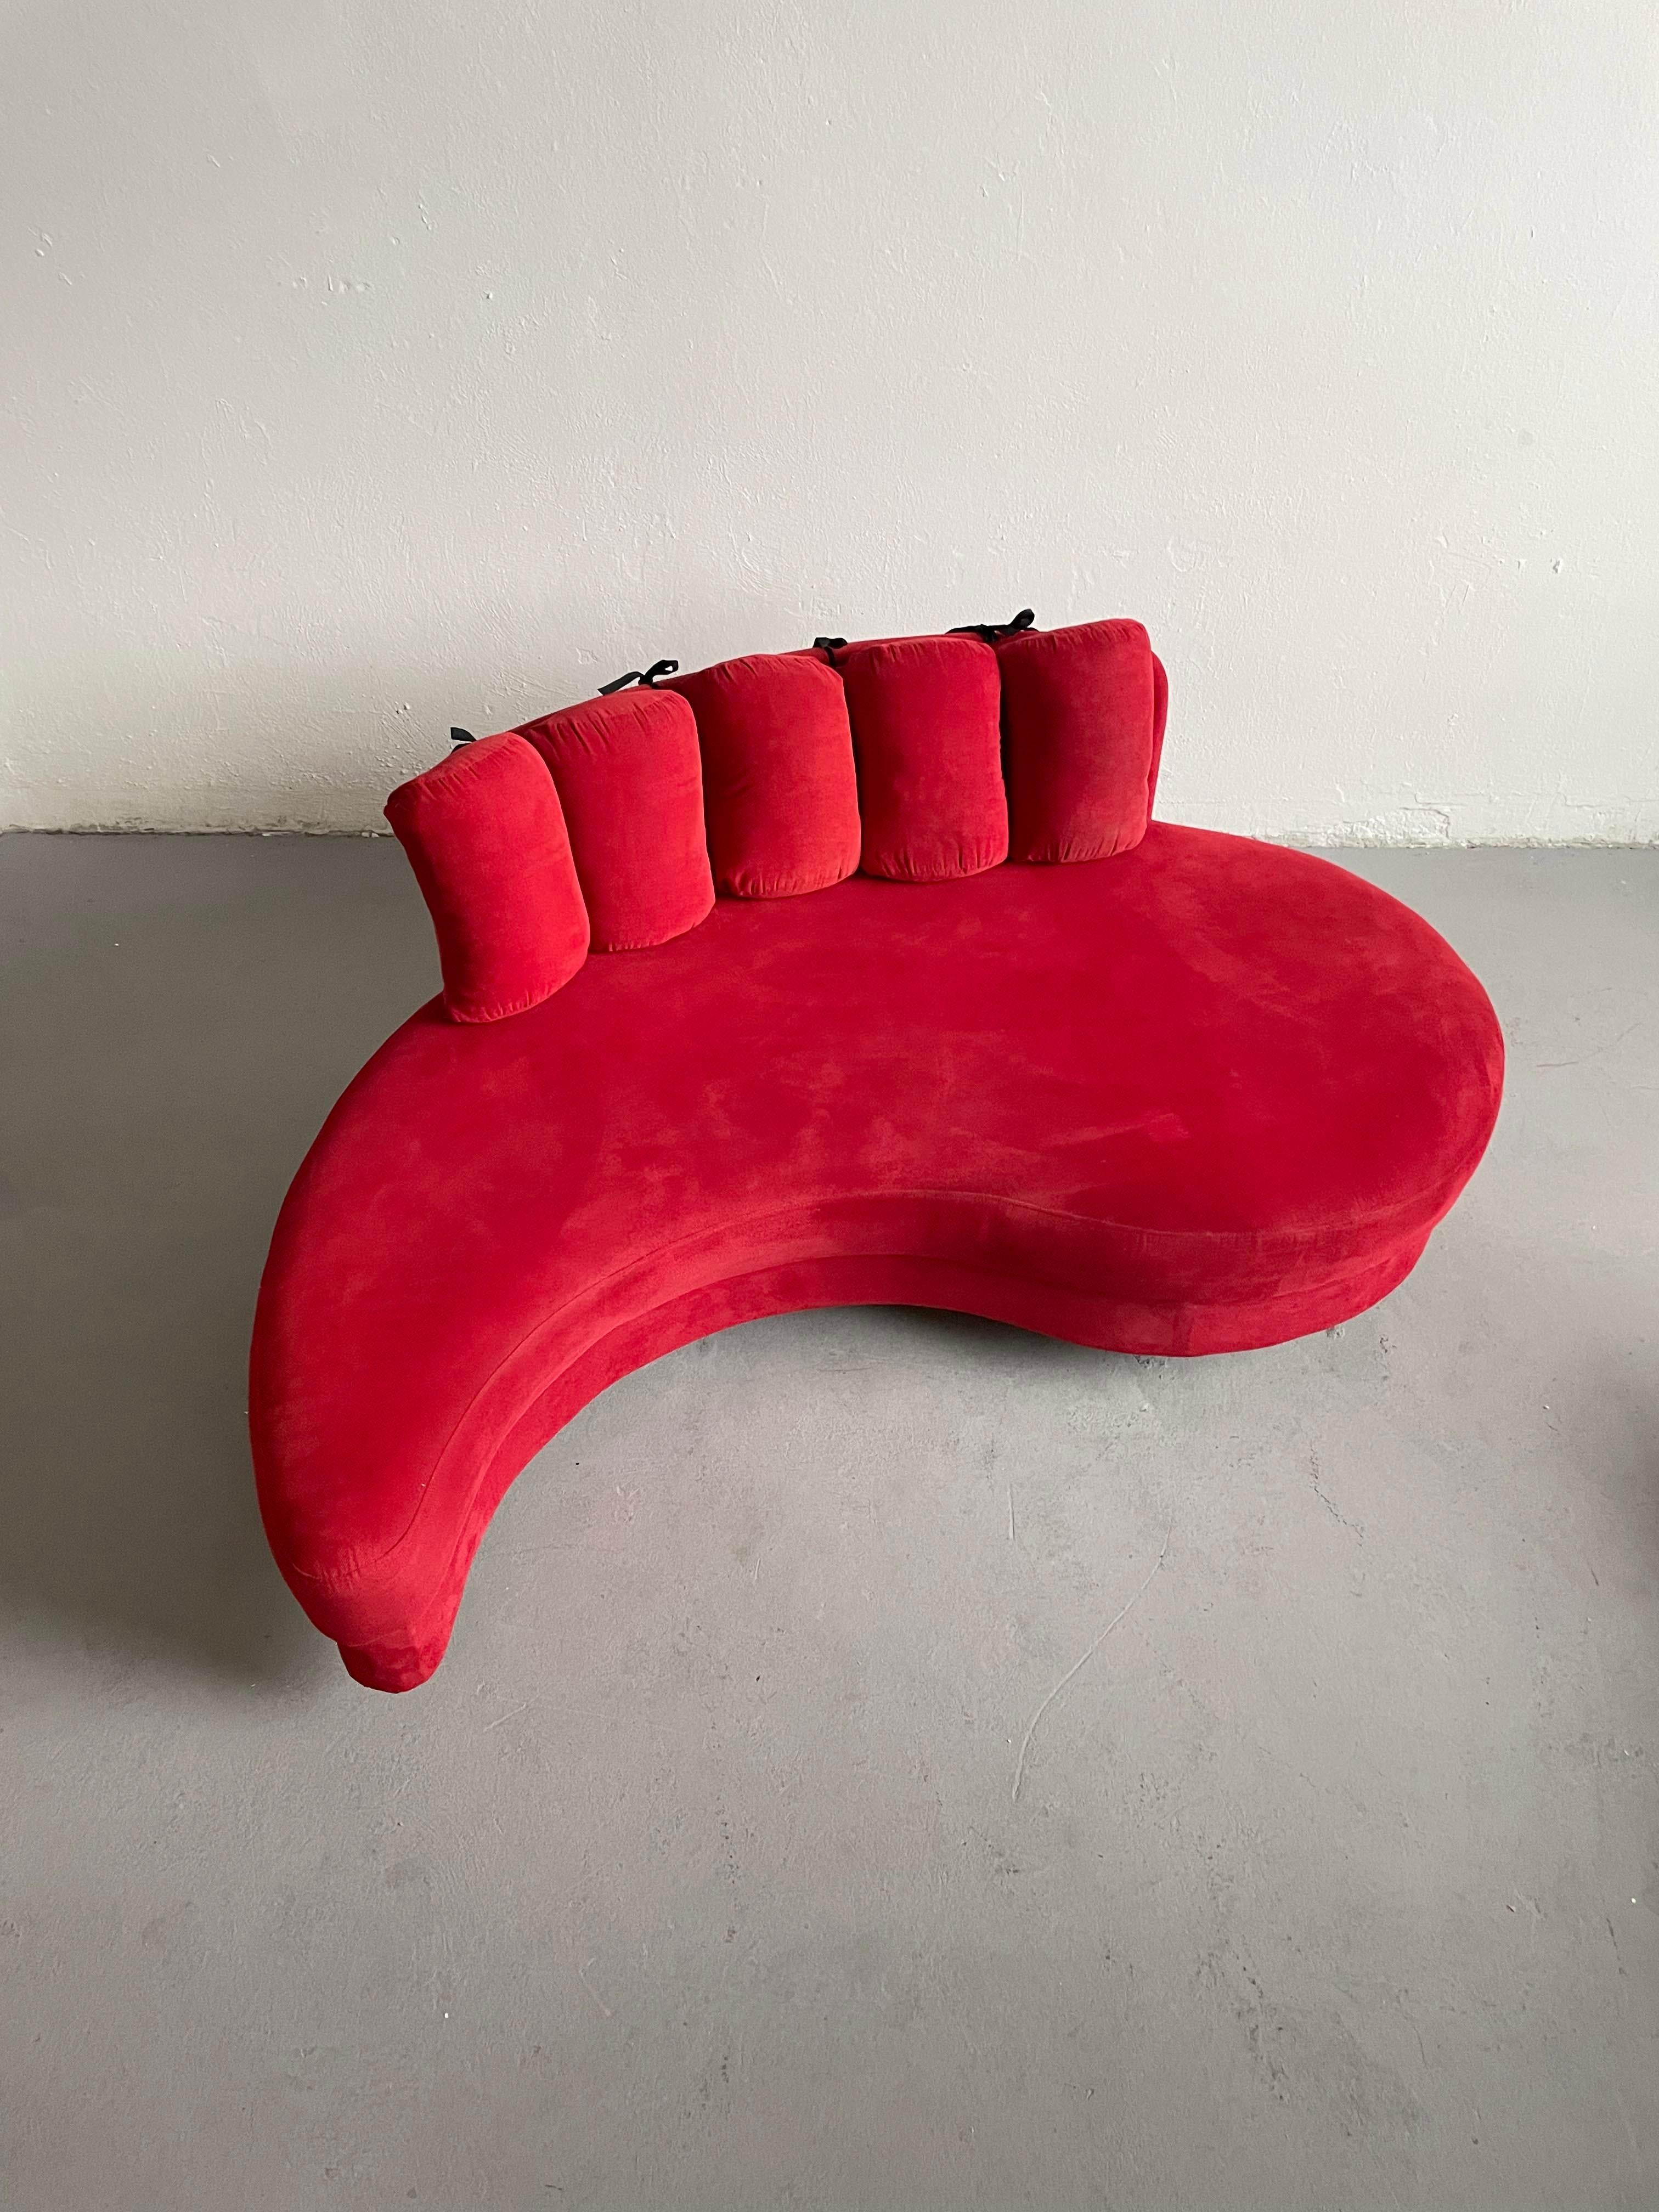 Set of 2 Postmodern Curved Yin-Yang Shaped Sofa Daybeds in Red Fabric, c 1980s For Sale 2